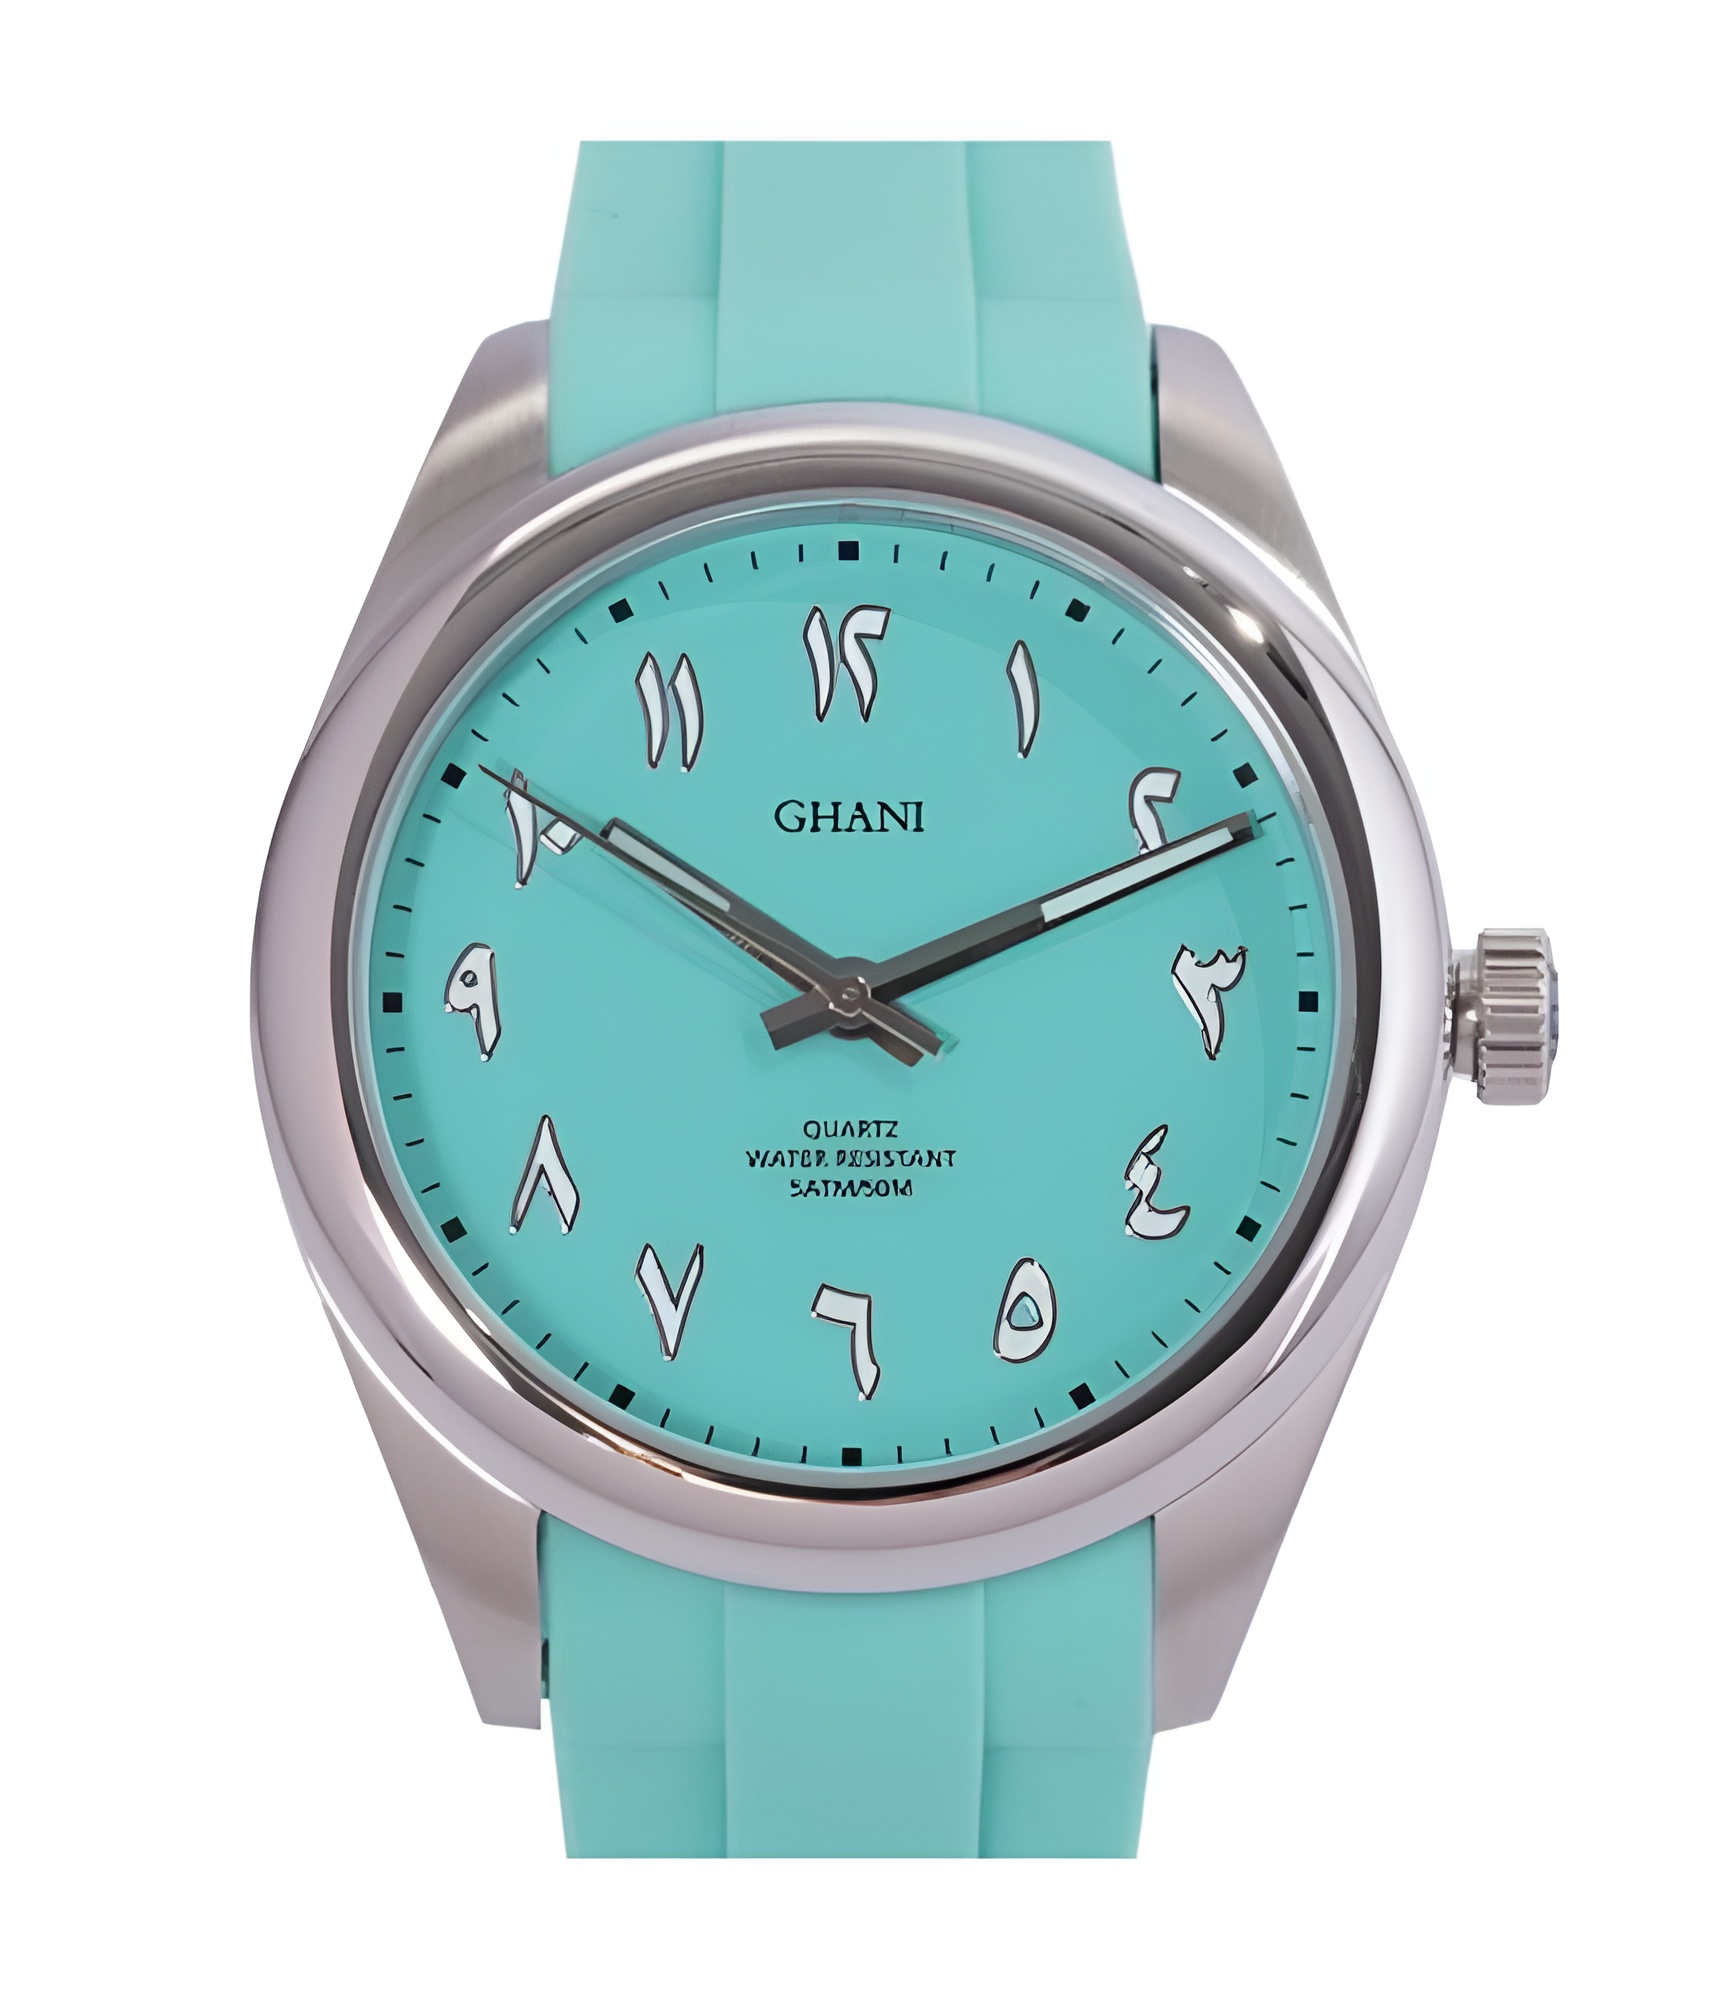 Buy Tiffany Watch from Ghani Watches available online at VEND. Explore more Watches collections now